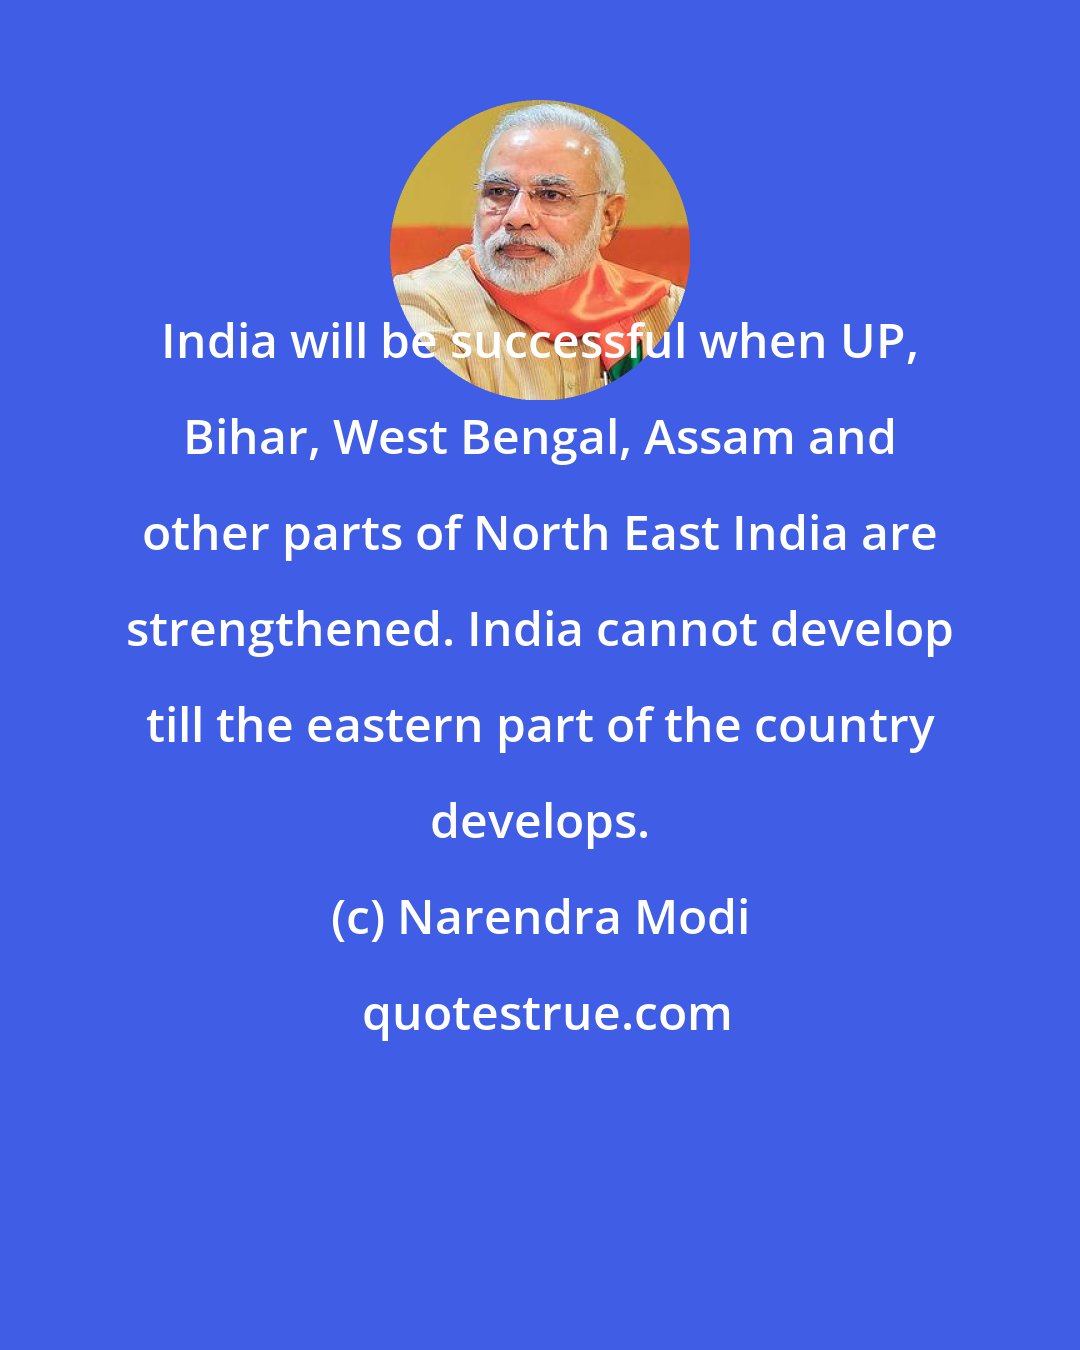 Narendra Modi: India will be successful when UP, Bihar, West Bengal, Assam and other parts of North East India are strengthened. India cannot develop till the eastern part of the country develops.